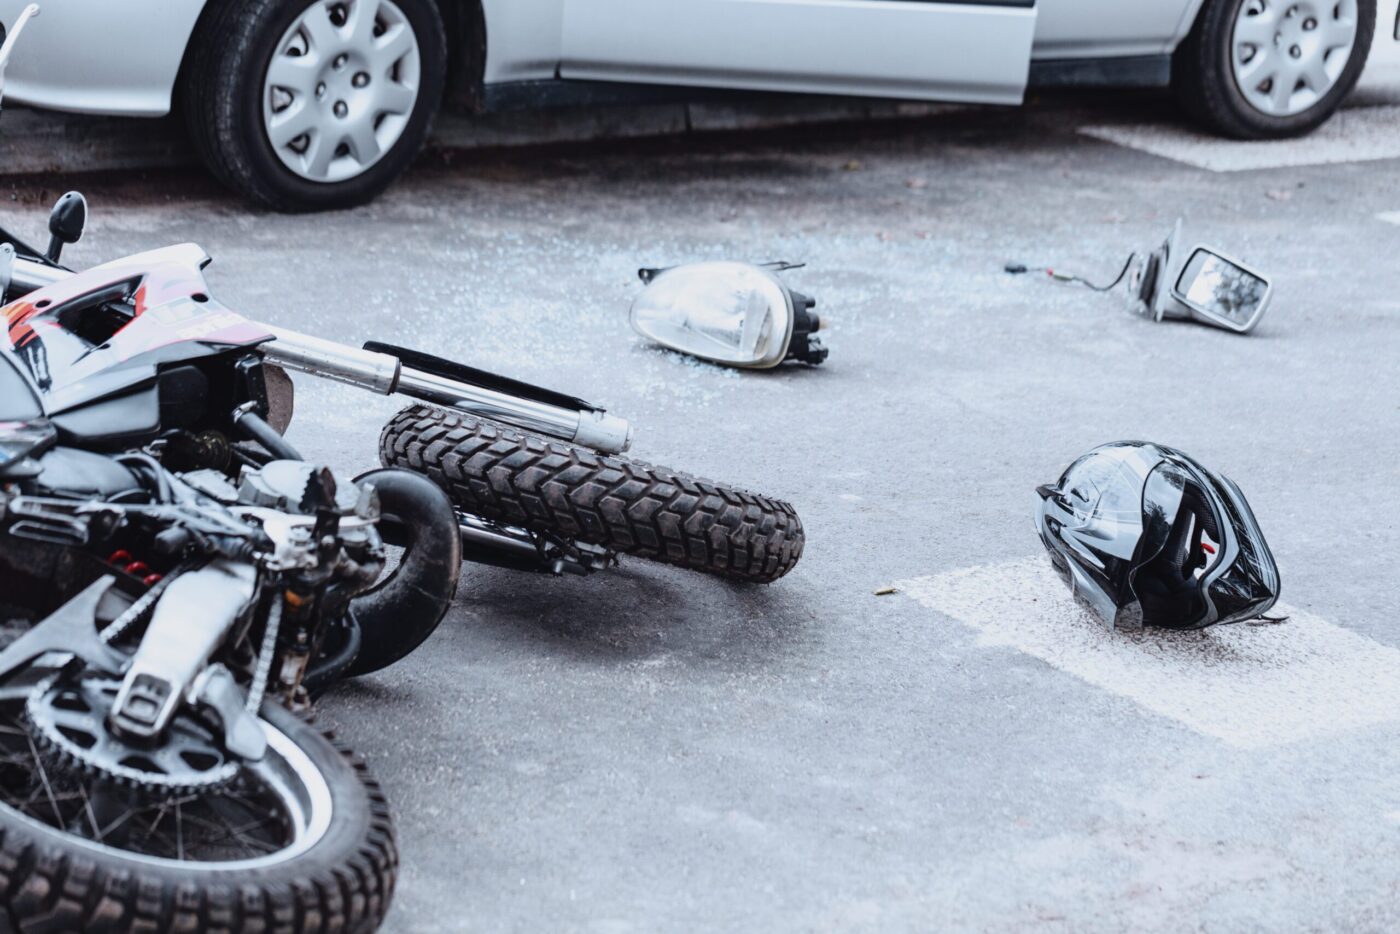 Overturned motorcycle and scattered debris on pavement, depicting the aftermath of a motorcycle accident.